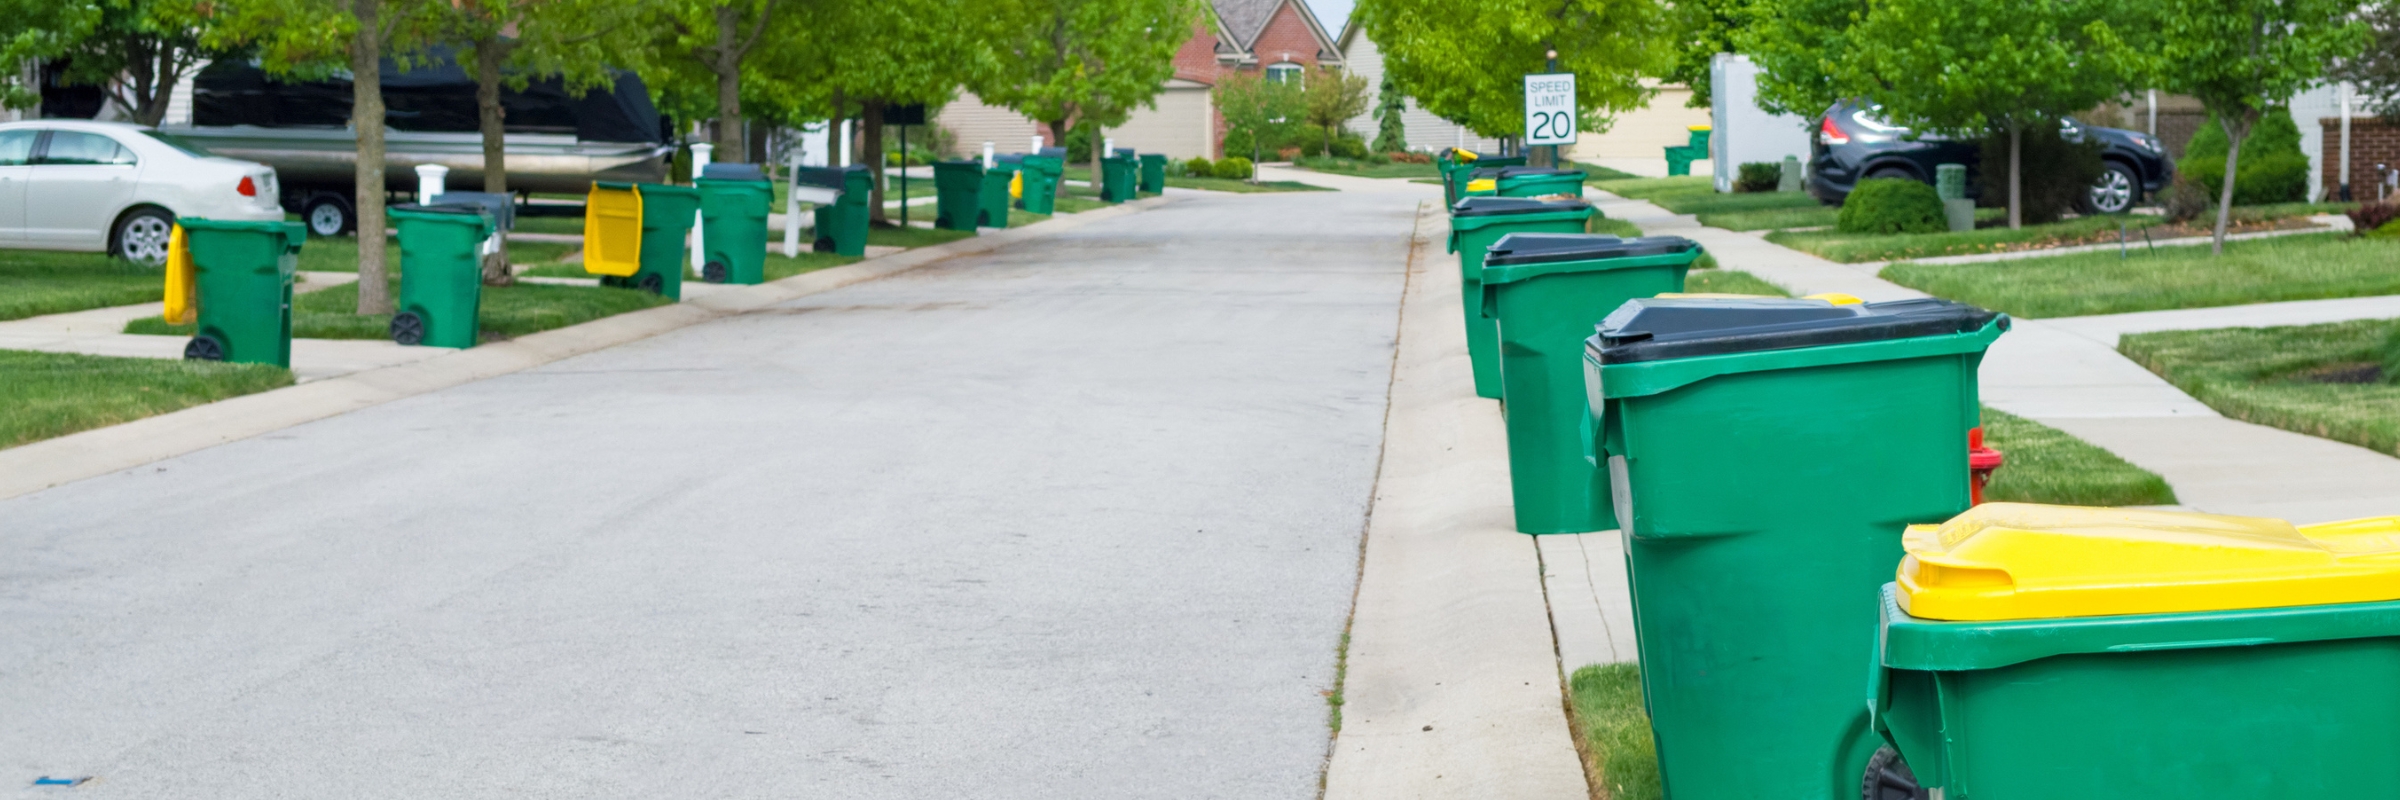 Green trash cans lined up on residential street